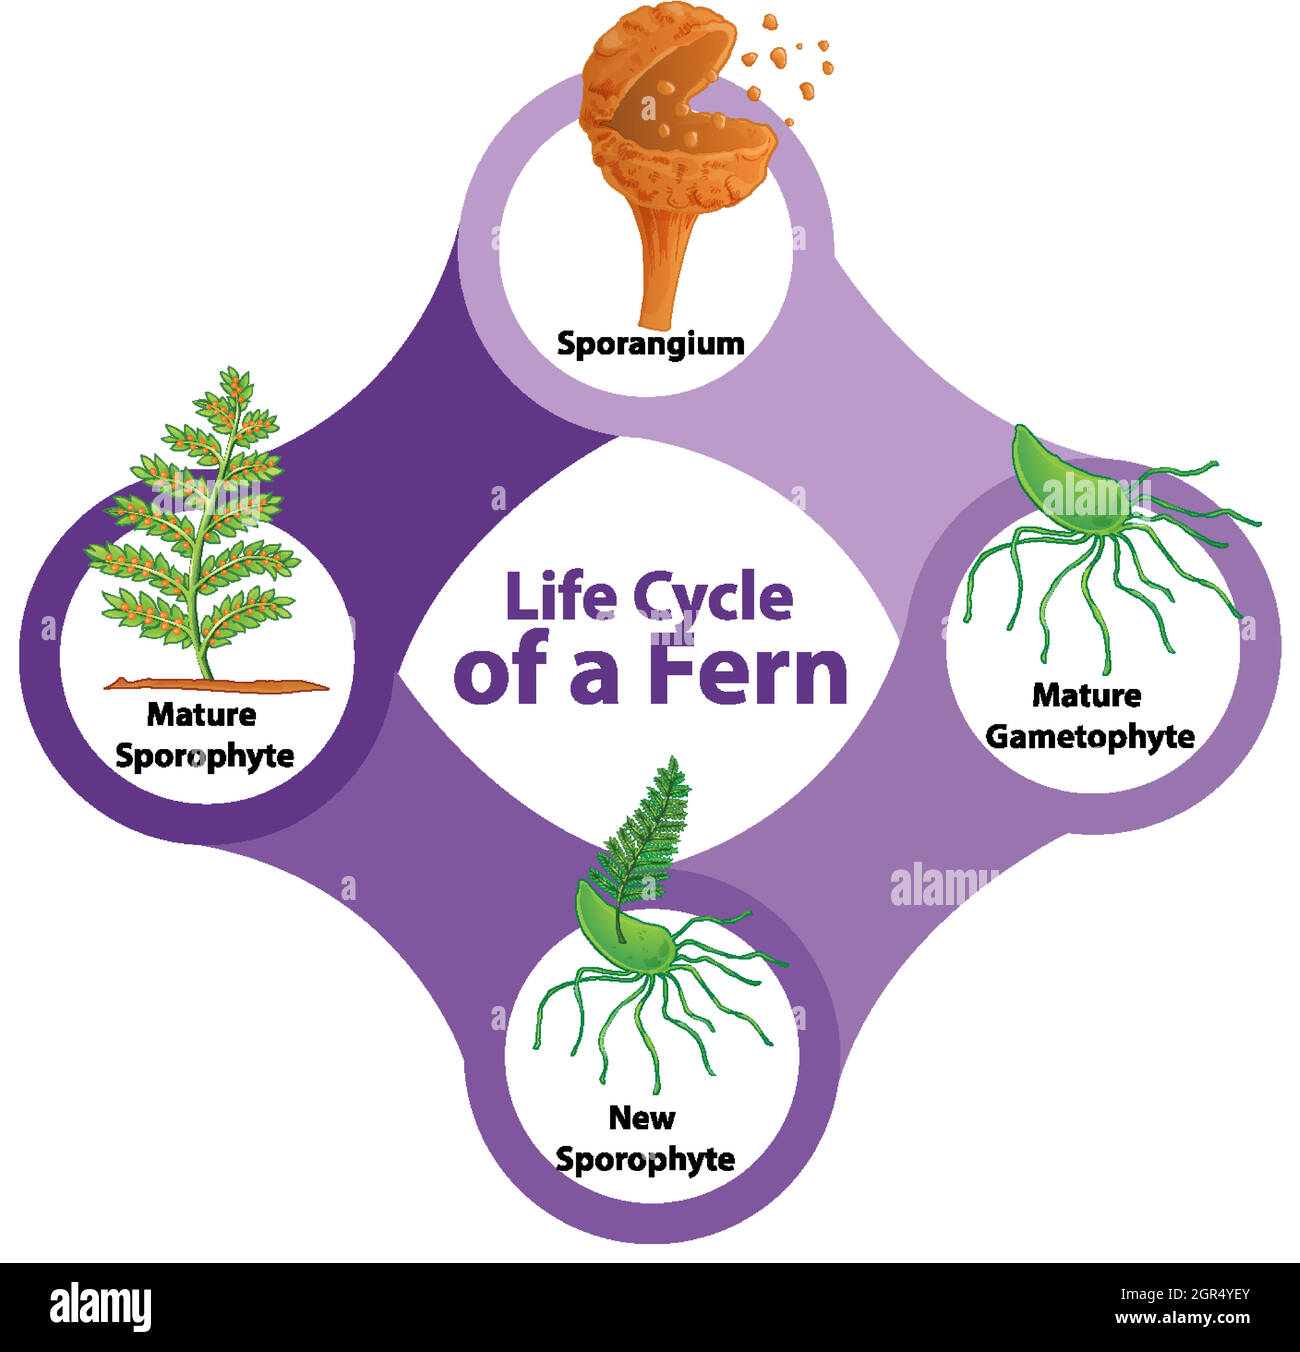 Life Cycle of a Fern Diagram Stock Vector